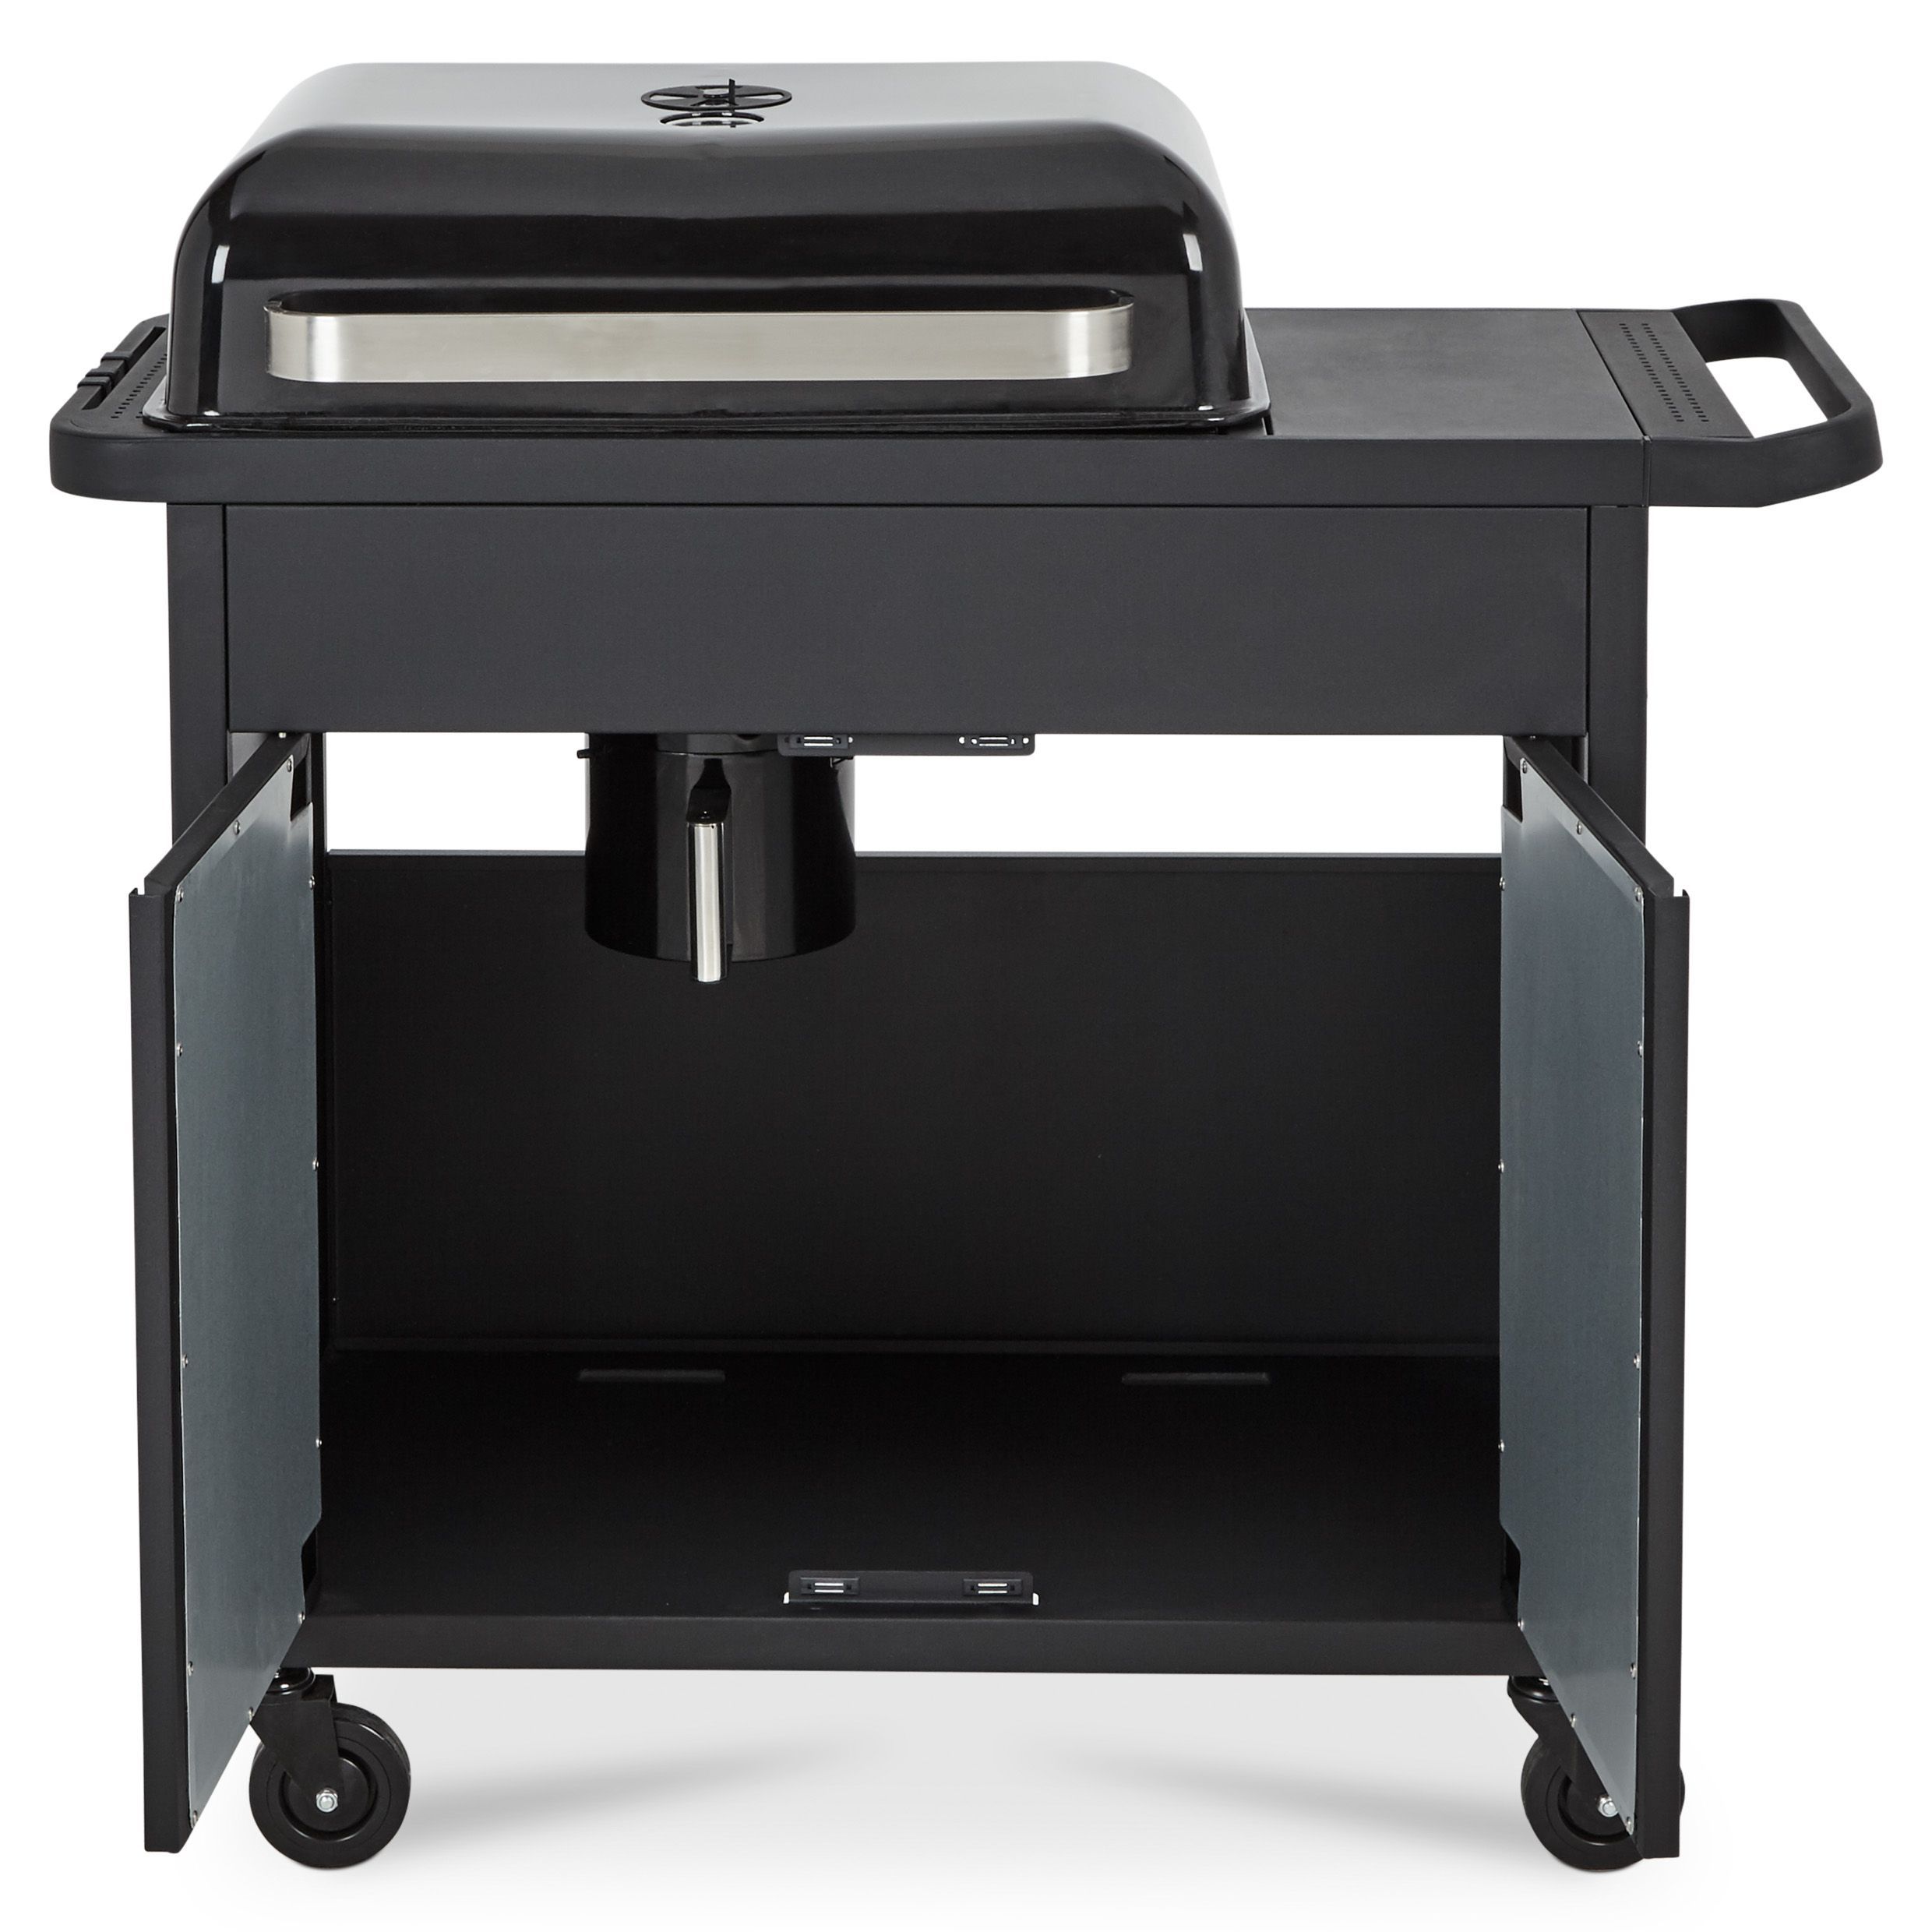 Blooma Rockwell 310 Black Charcoal Barbecue